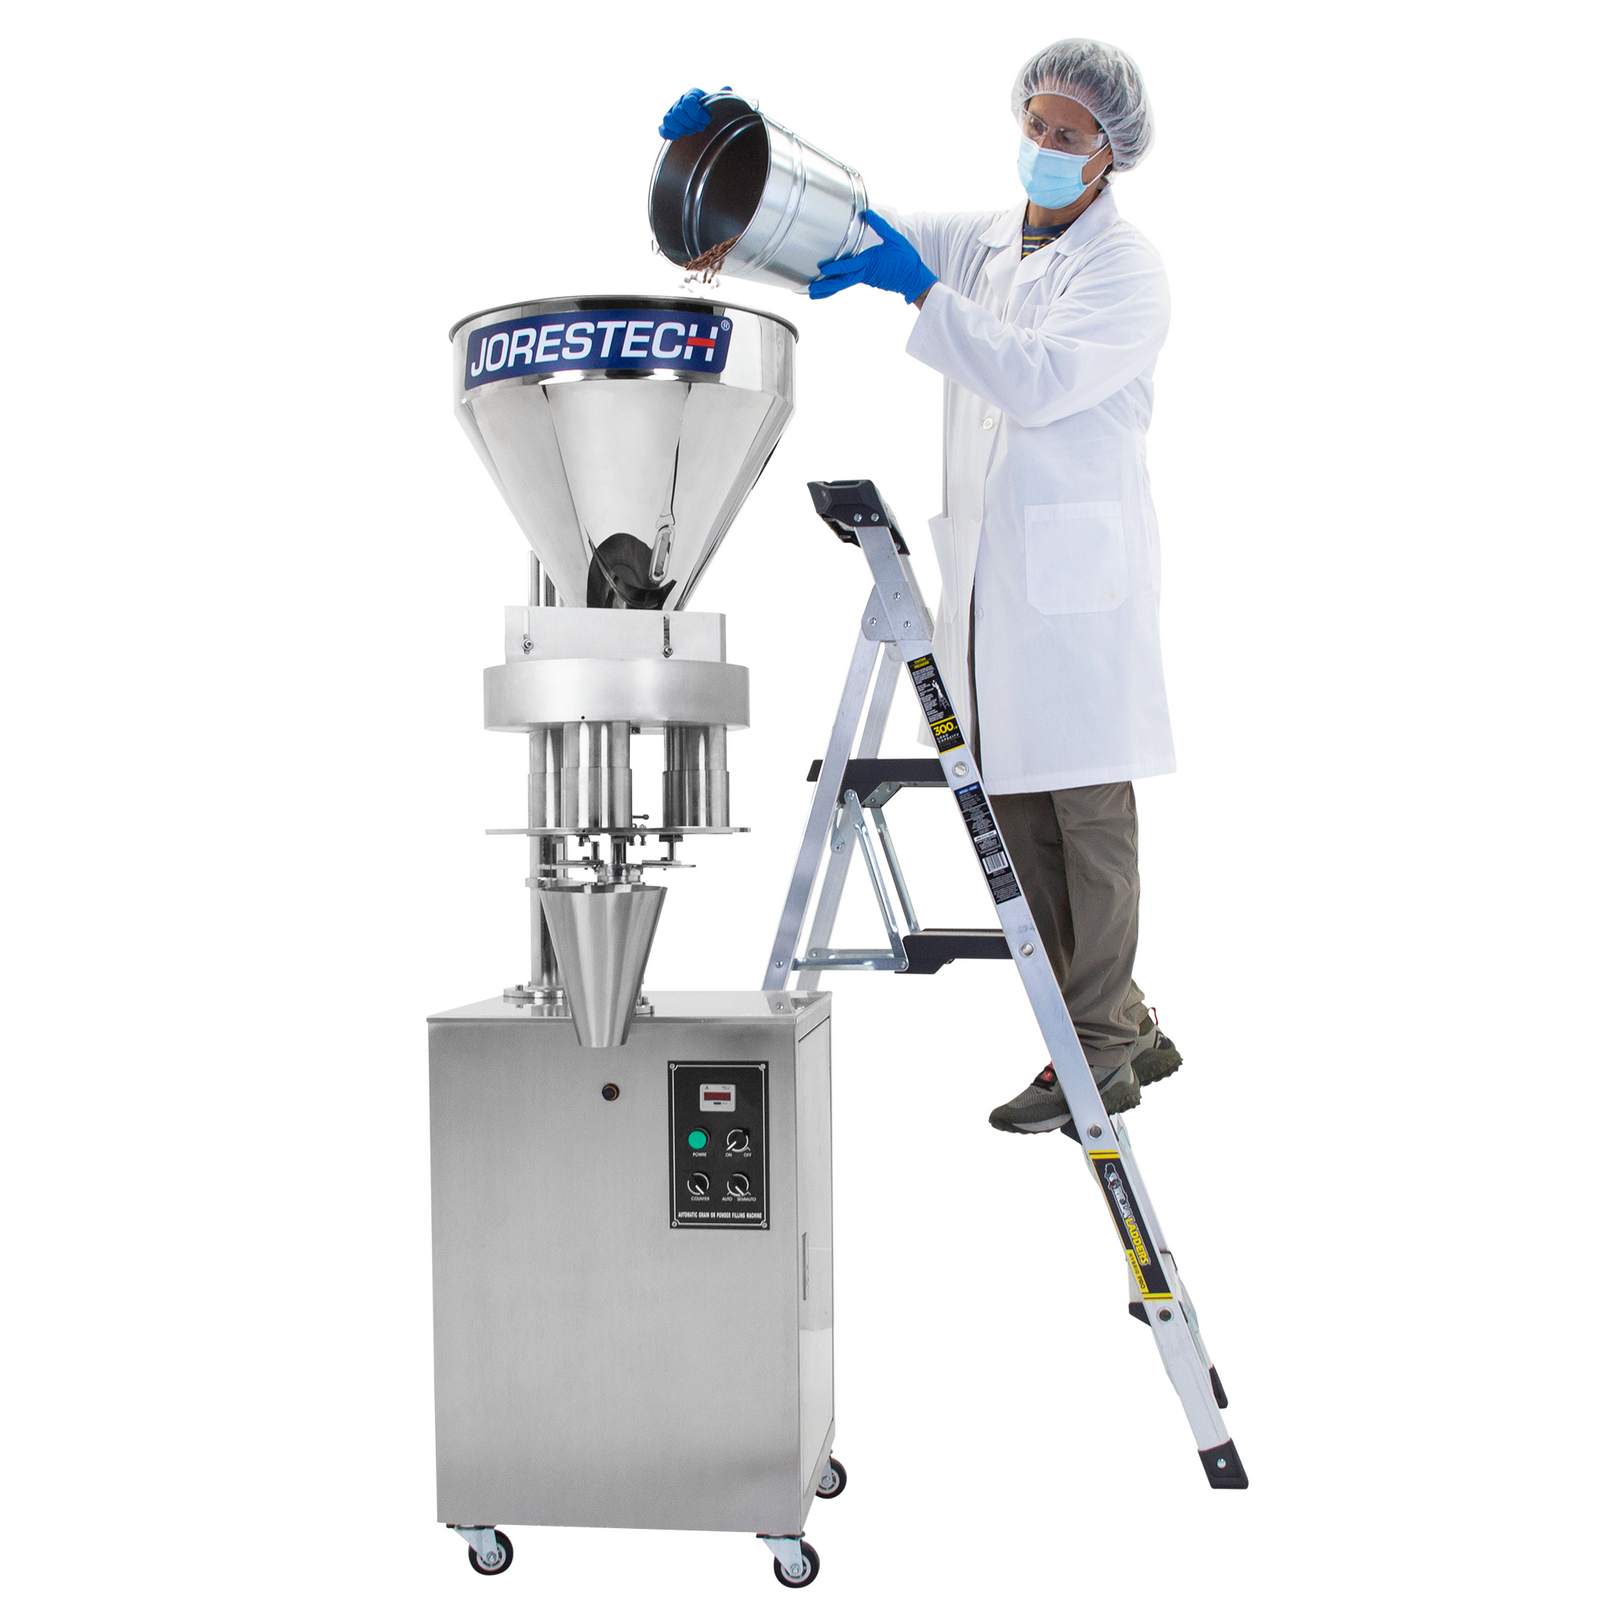 A worker standing on a ladder and dispensing a bucket full of beans into the stainless steel hopper of the JORES TECHNOLOGIES® semi automatic volumetric filler of 500ml